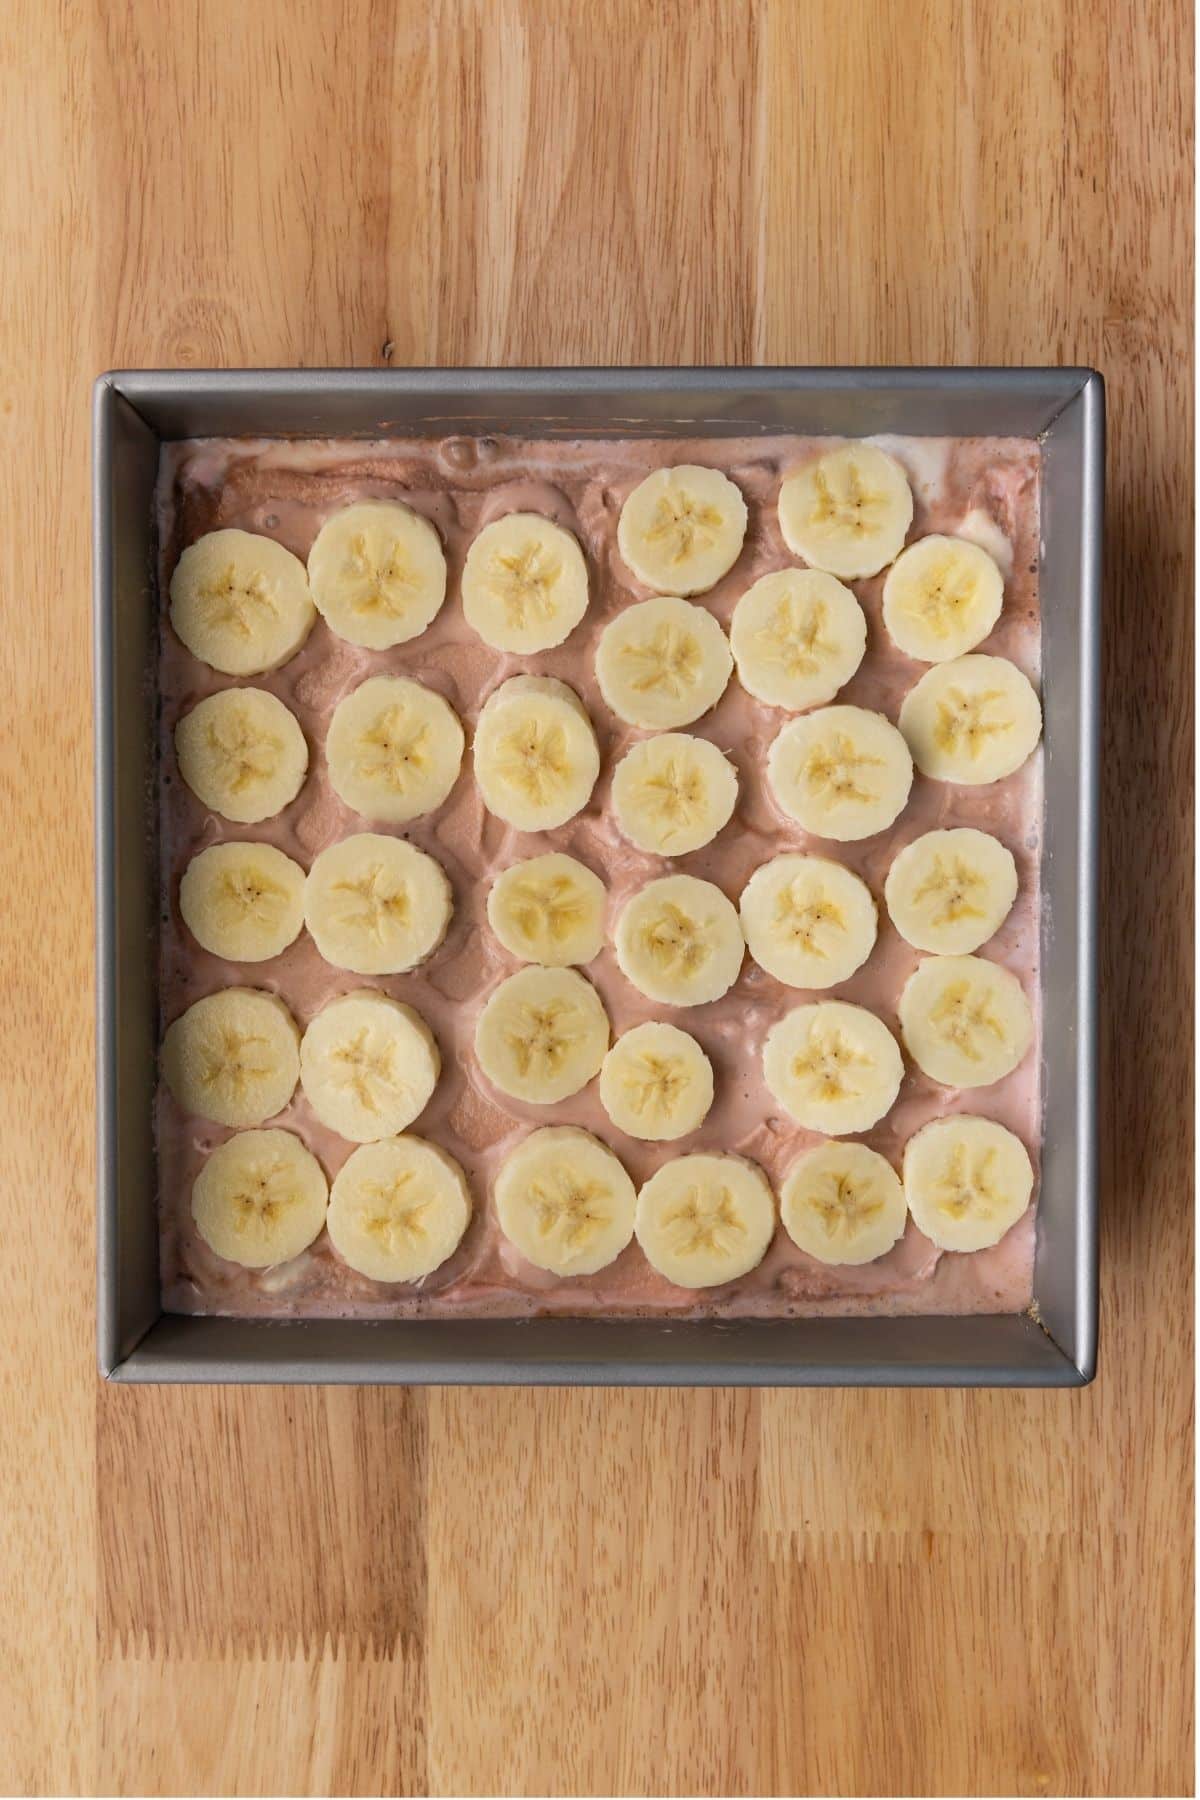 Banana slices over ice cream in square pan.